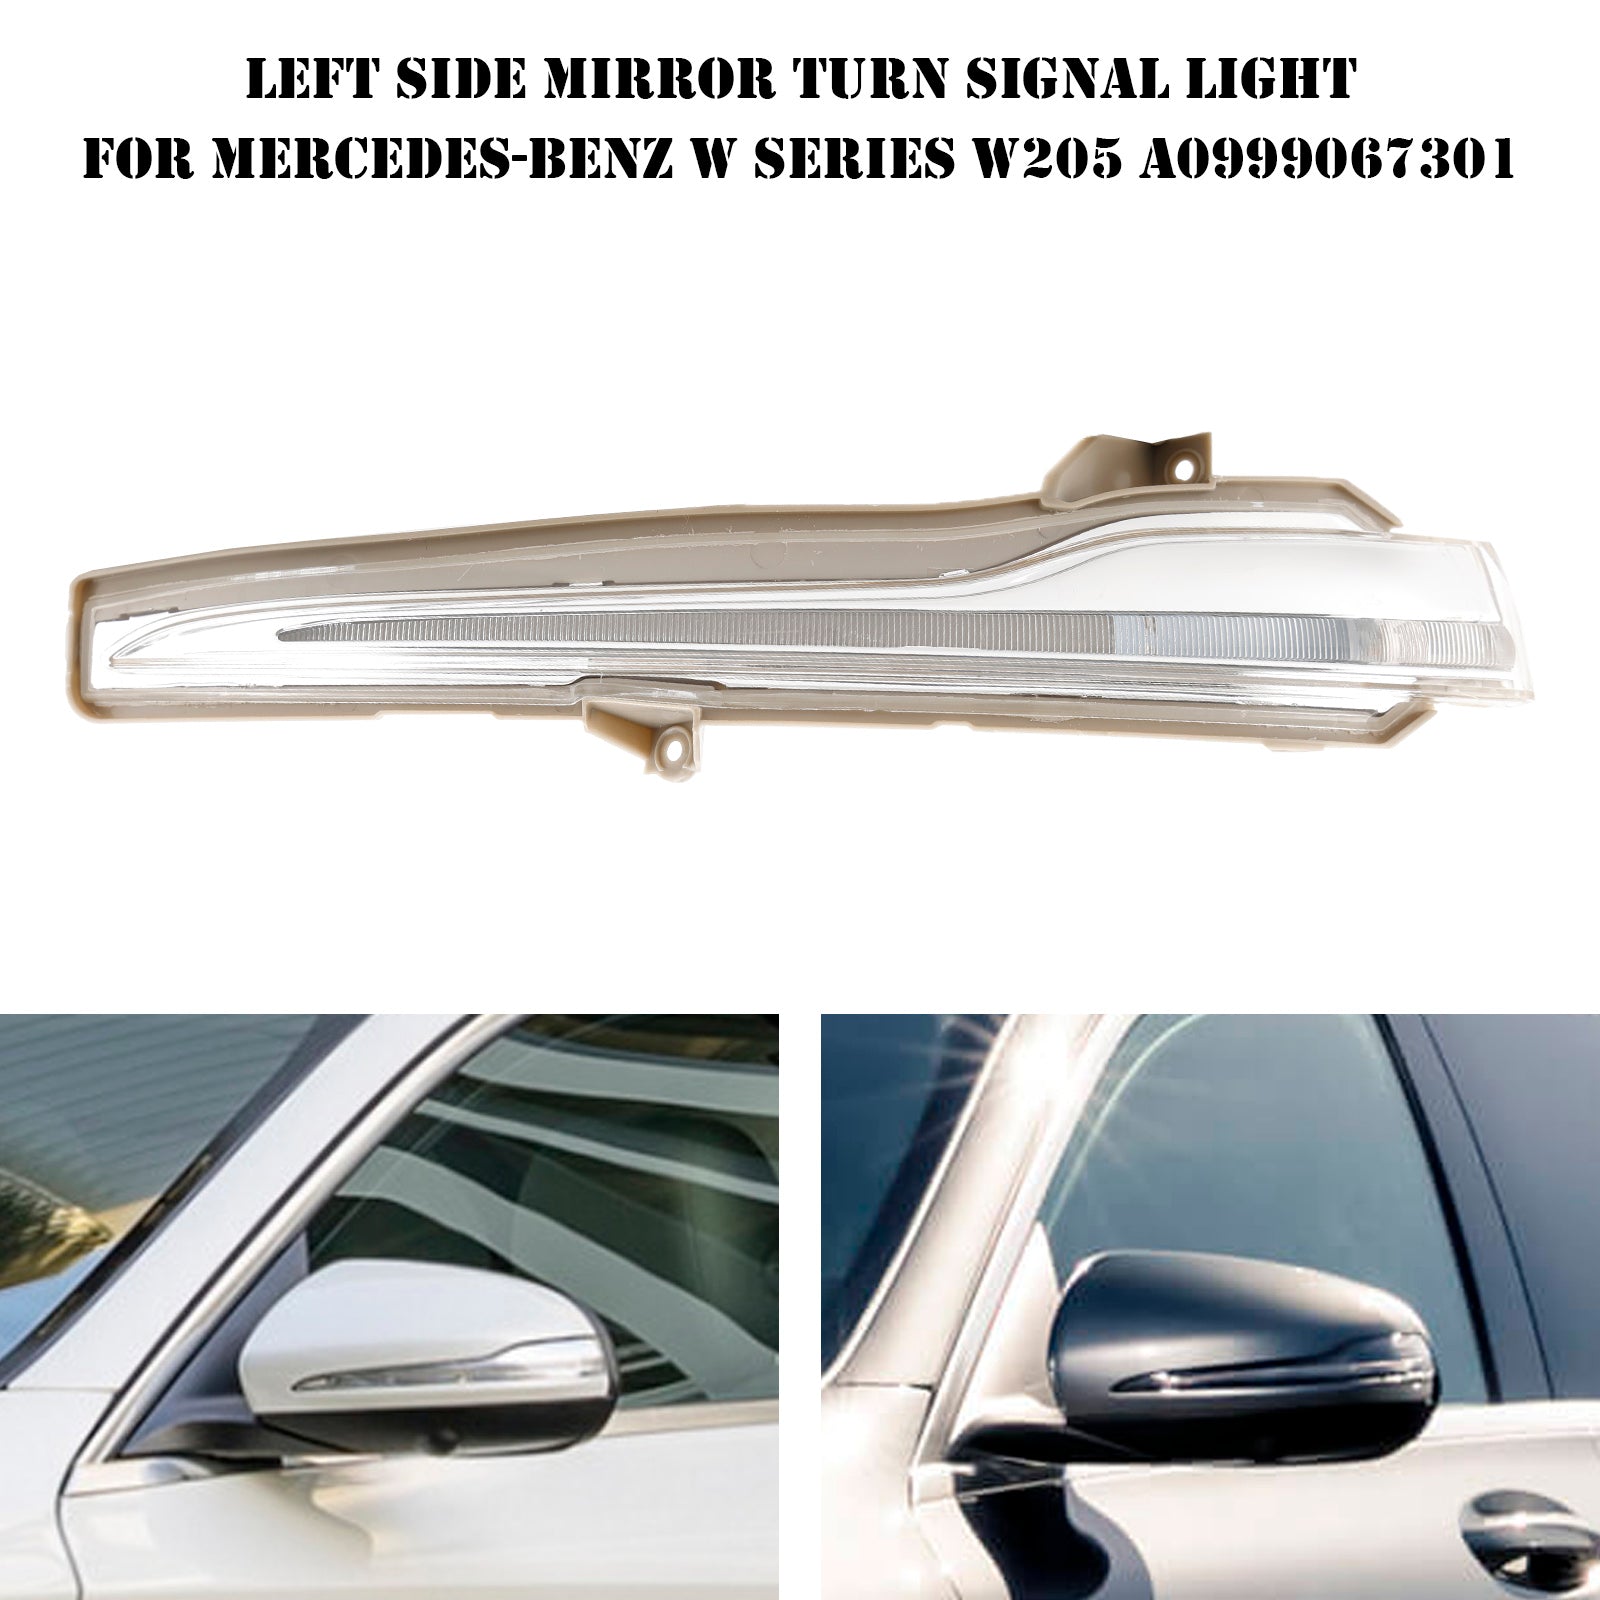 Right Side Mirror Turn Signal Light pour Mercedes-Benz W Series W205 A0999067401